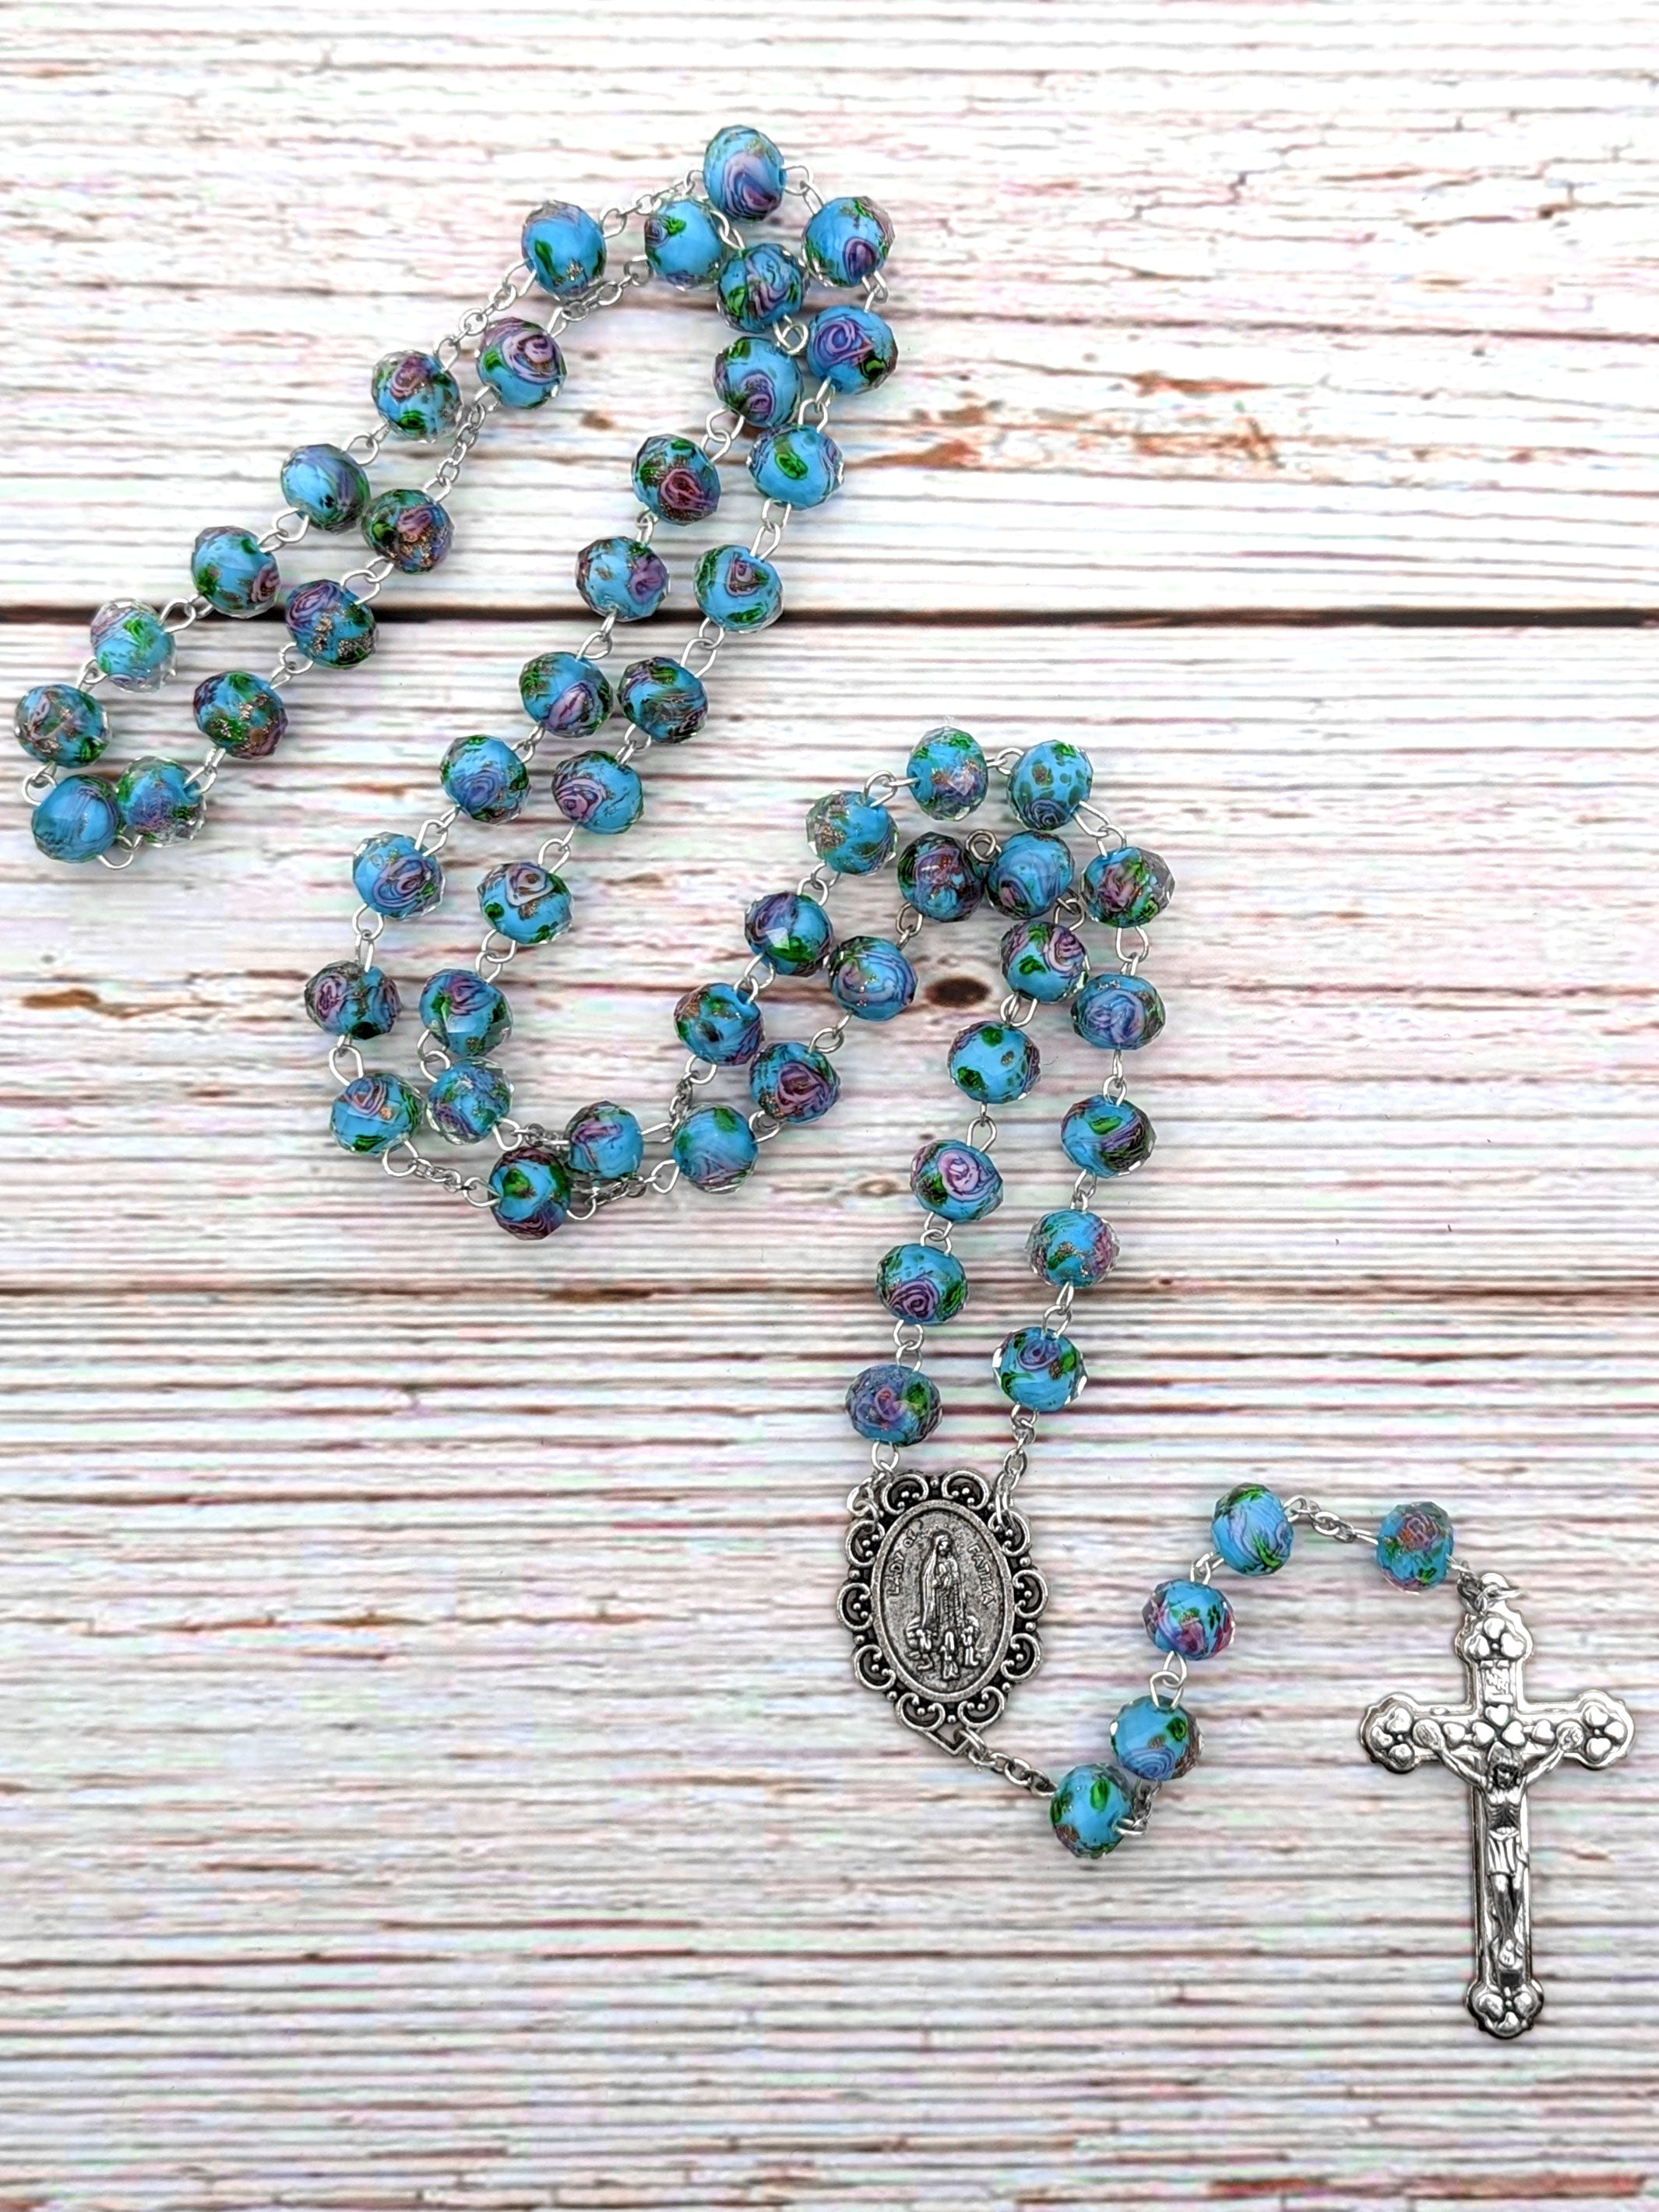 Handmade Our Lady of Fatima Rosary with Murano Glass Beads Blue